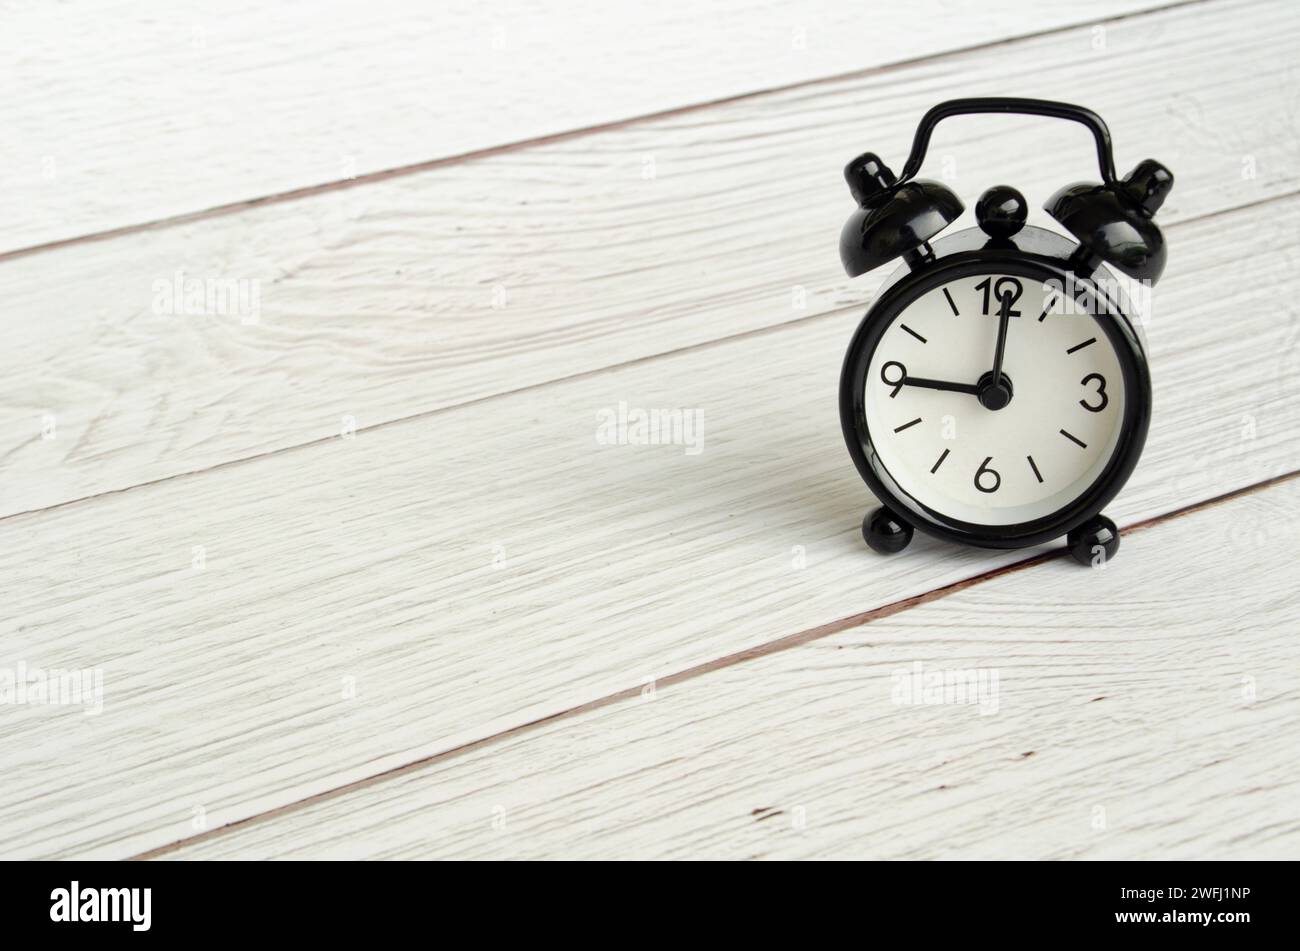 Black table alarm clock with customizable space for text. Time concept and copy space. Stock Photo